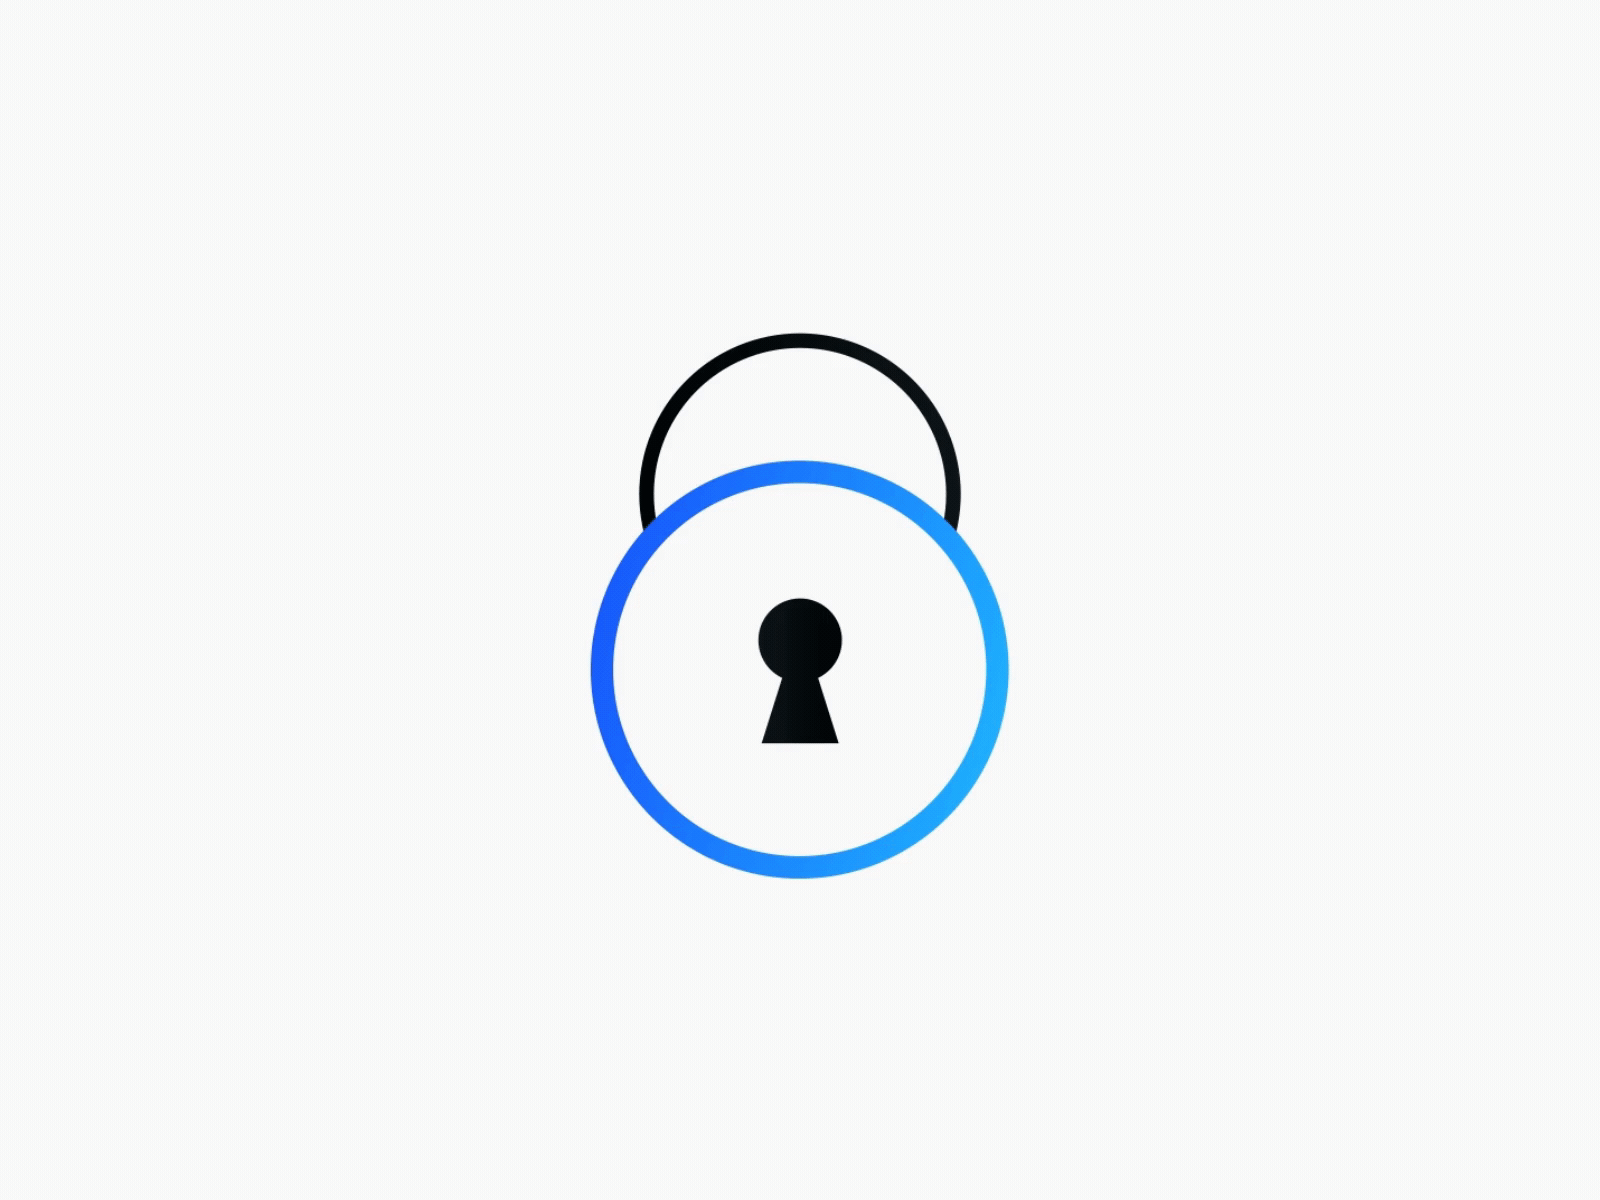 secure-password-by-hamza-ouaziz-for-fellas-on-dribbble